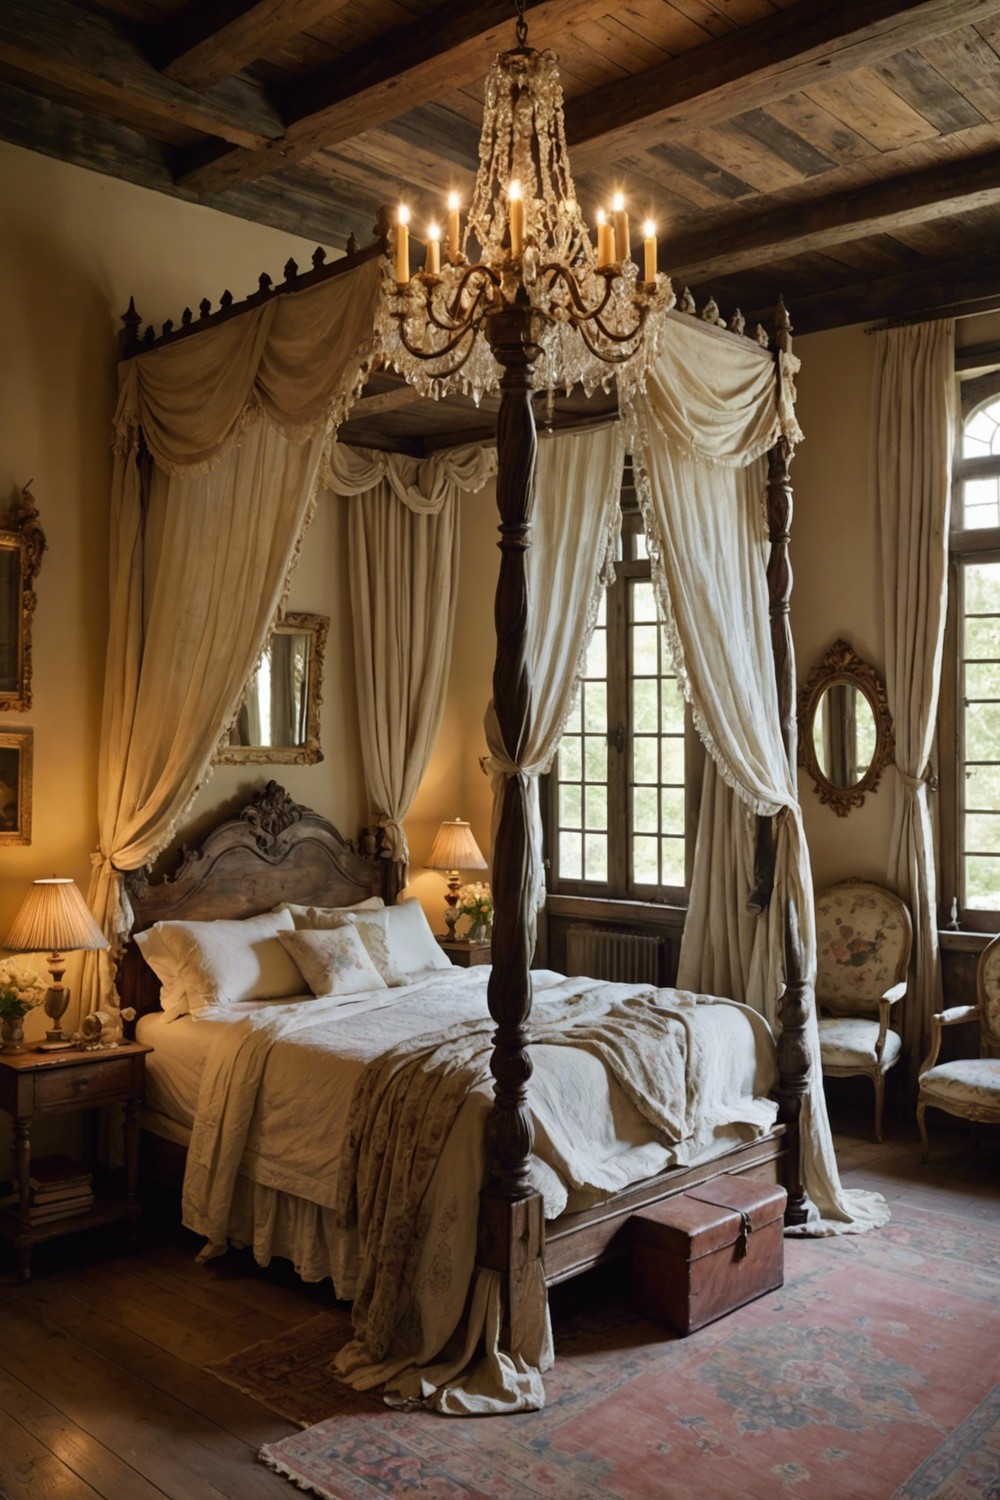 Vintage Flair: Hanging Antique Chandeliers above a Distressed Bed